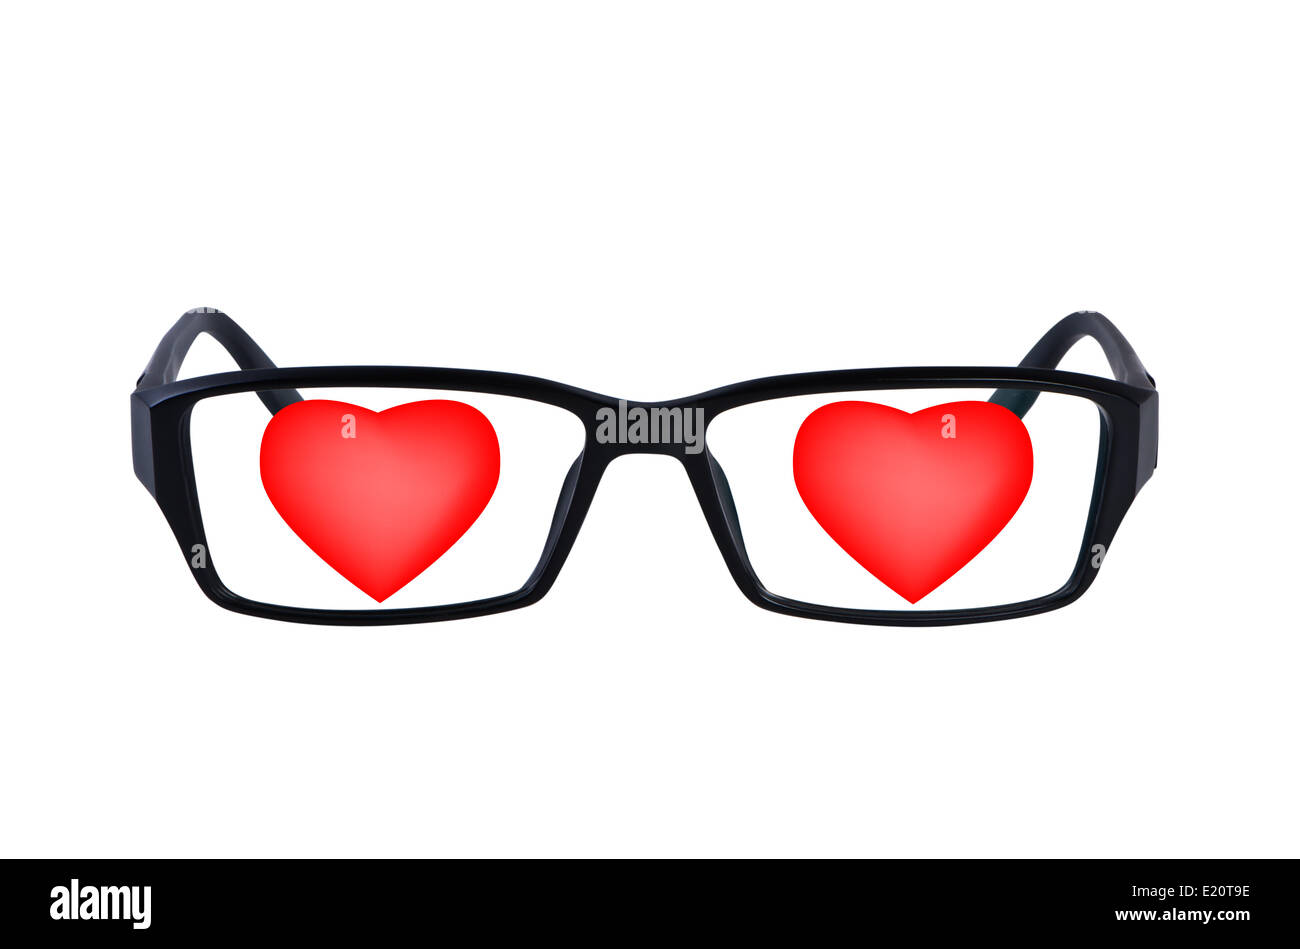 Eye glasses with hearts isolated. Stock Photo